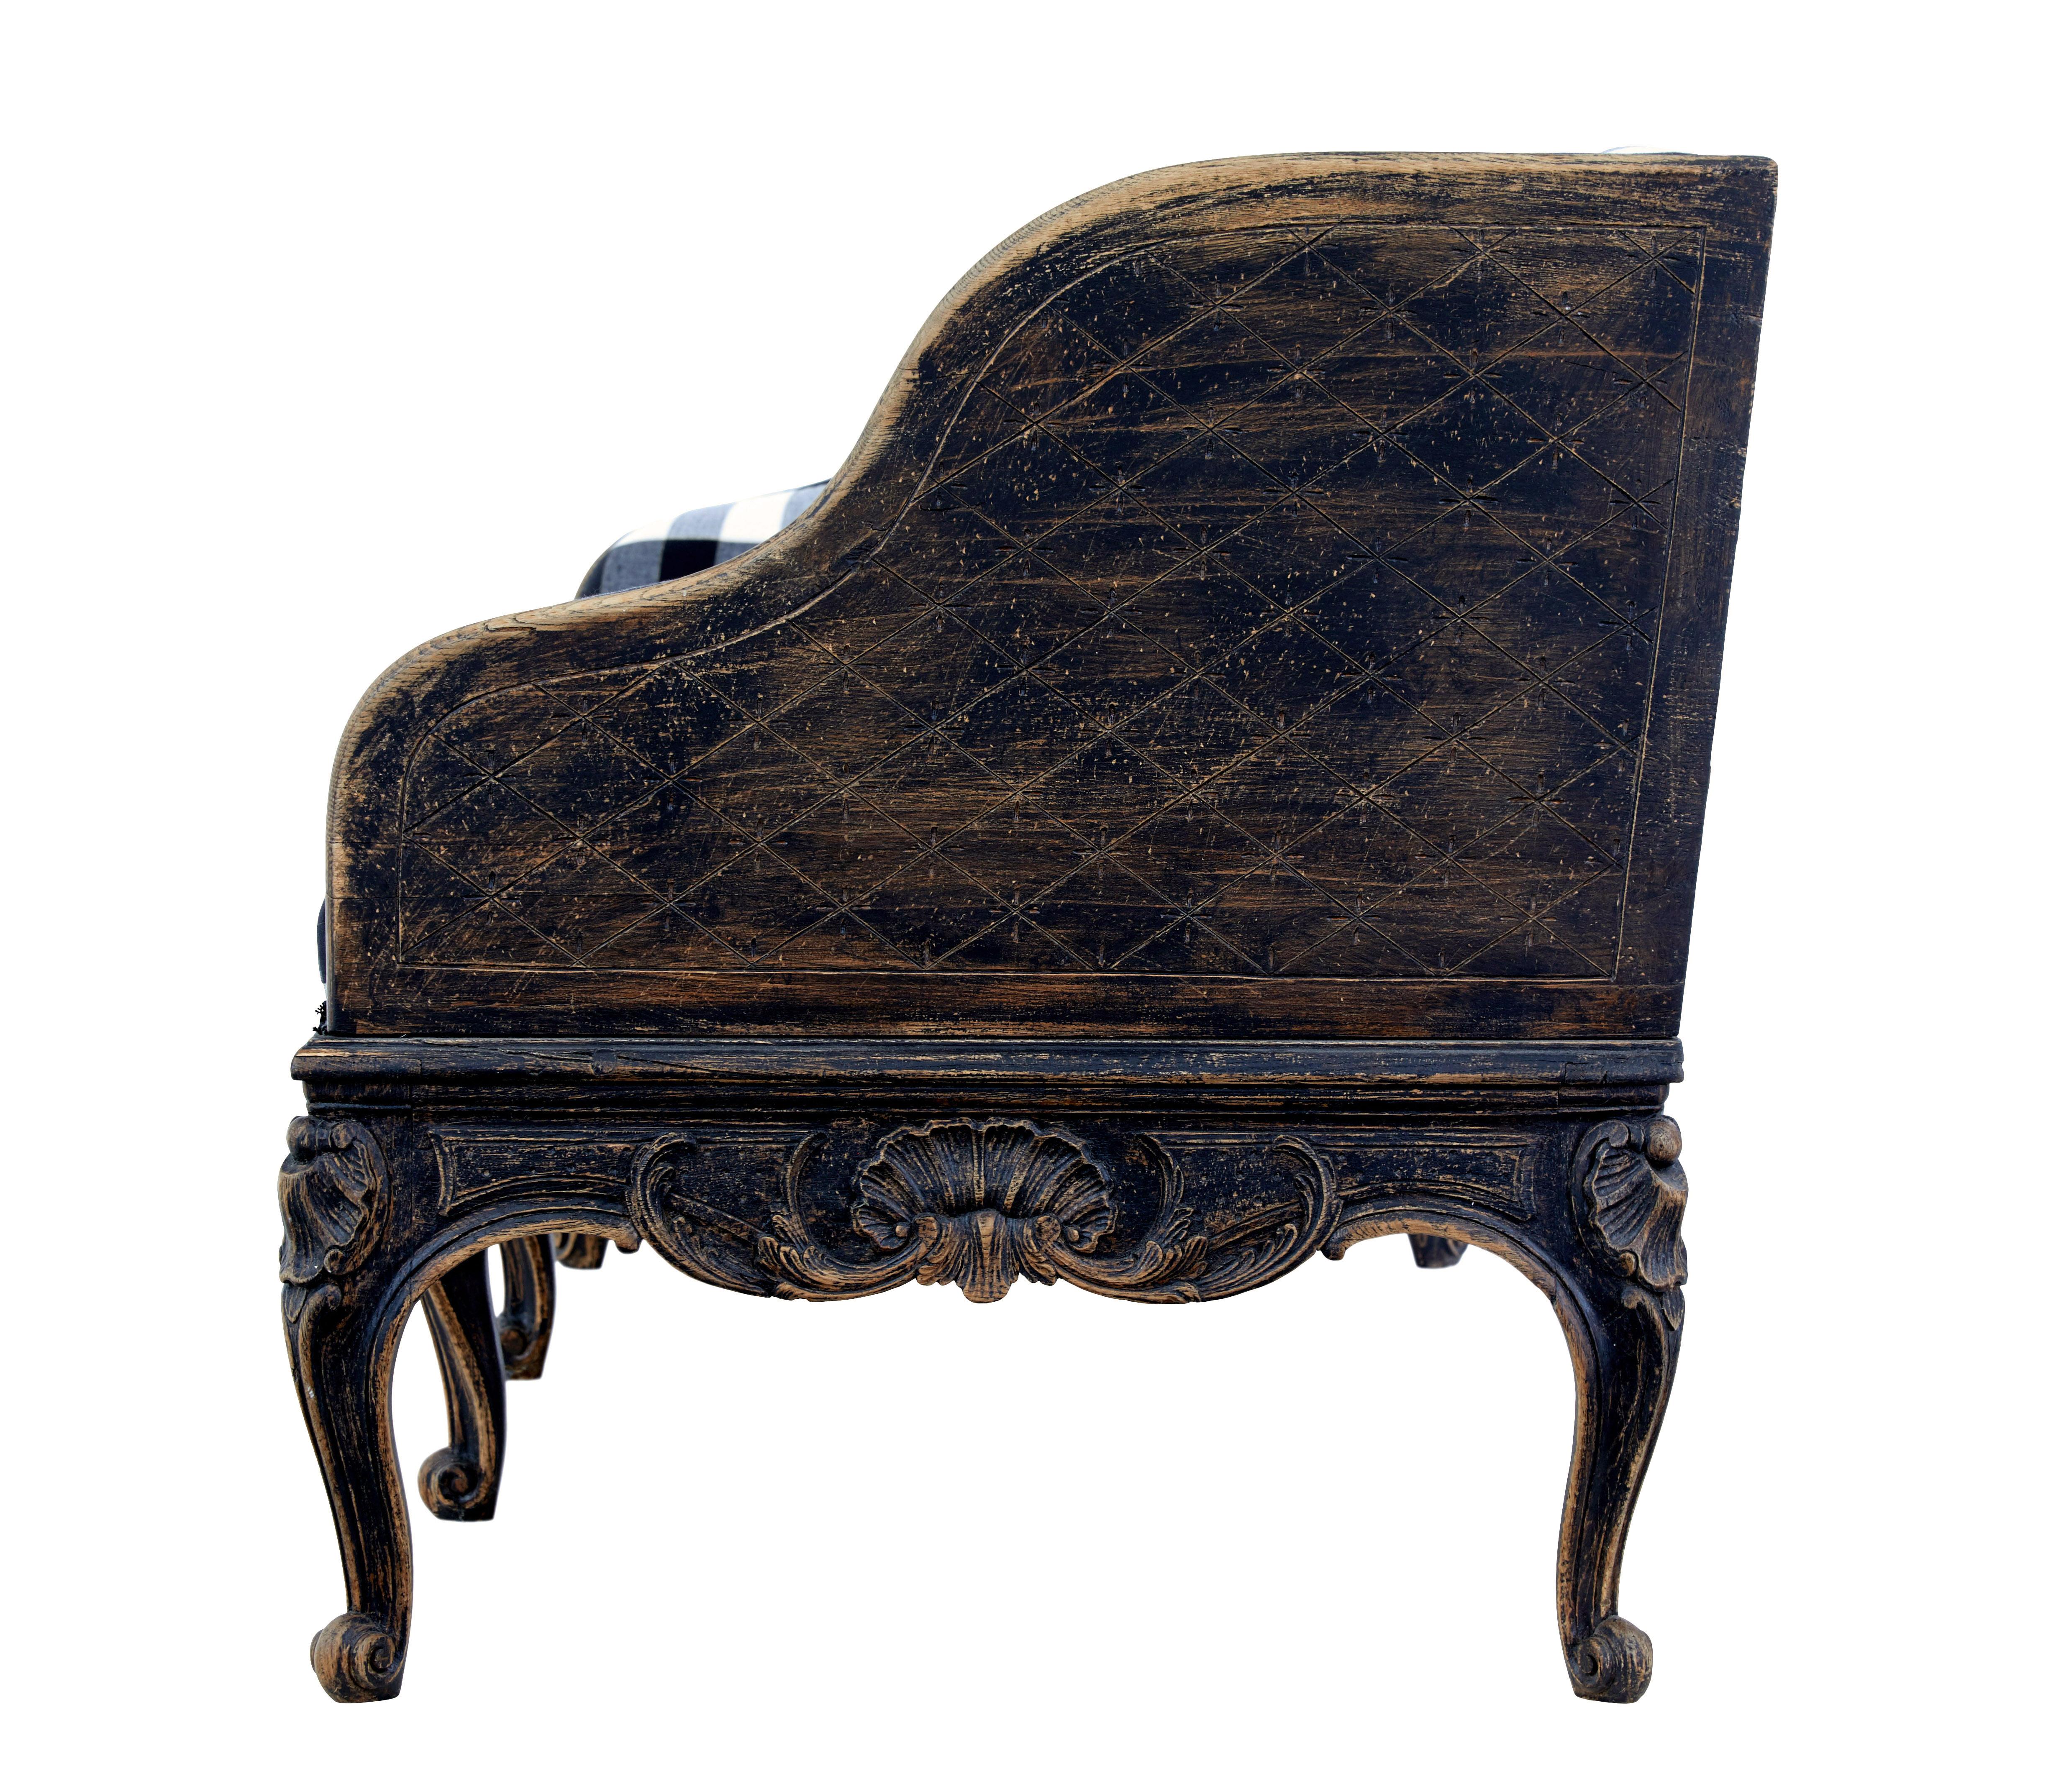 Hand-Carved Early 19th century carved oak Swedish painted sofa